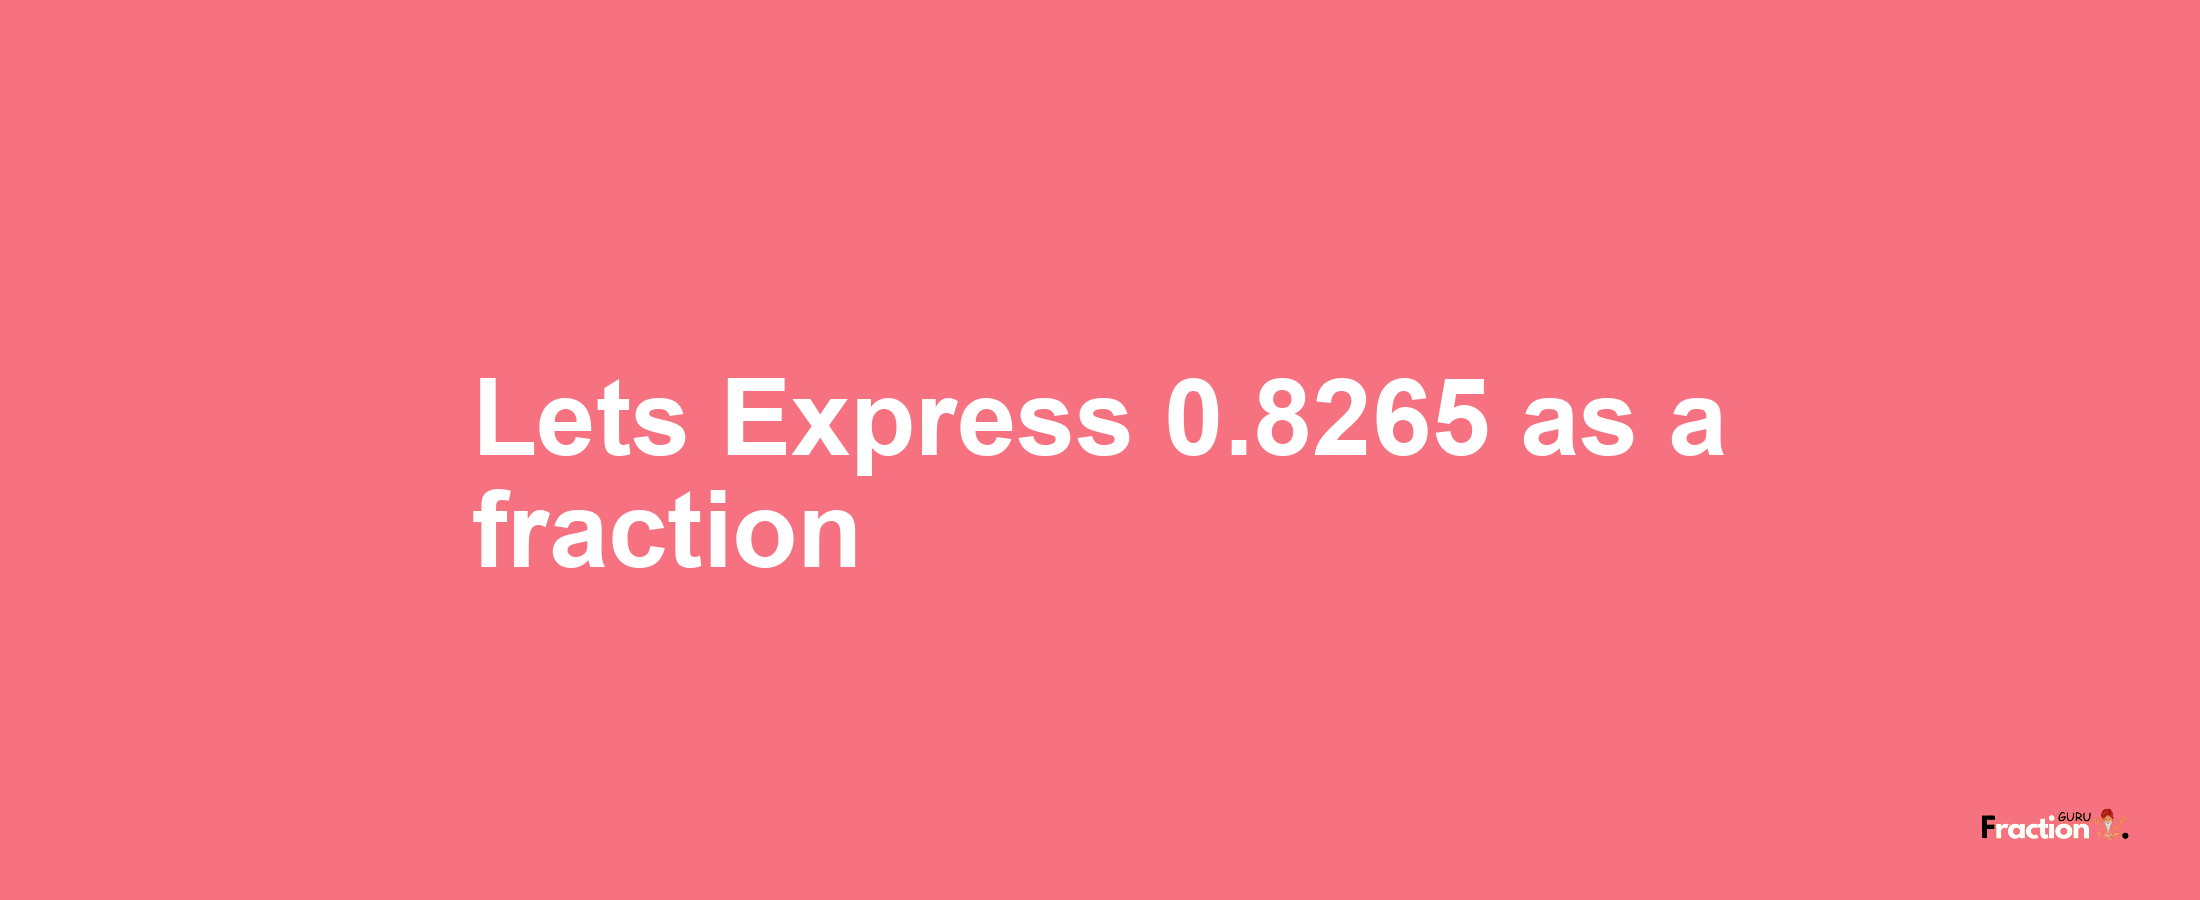 Lets Express 0.8265 as afraction